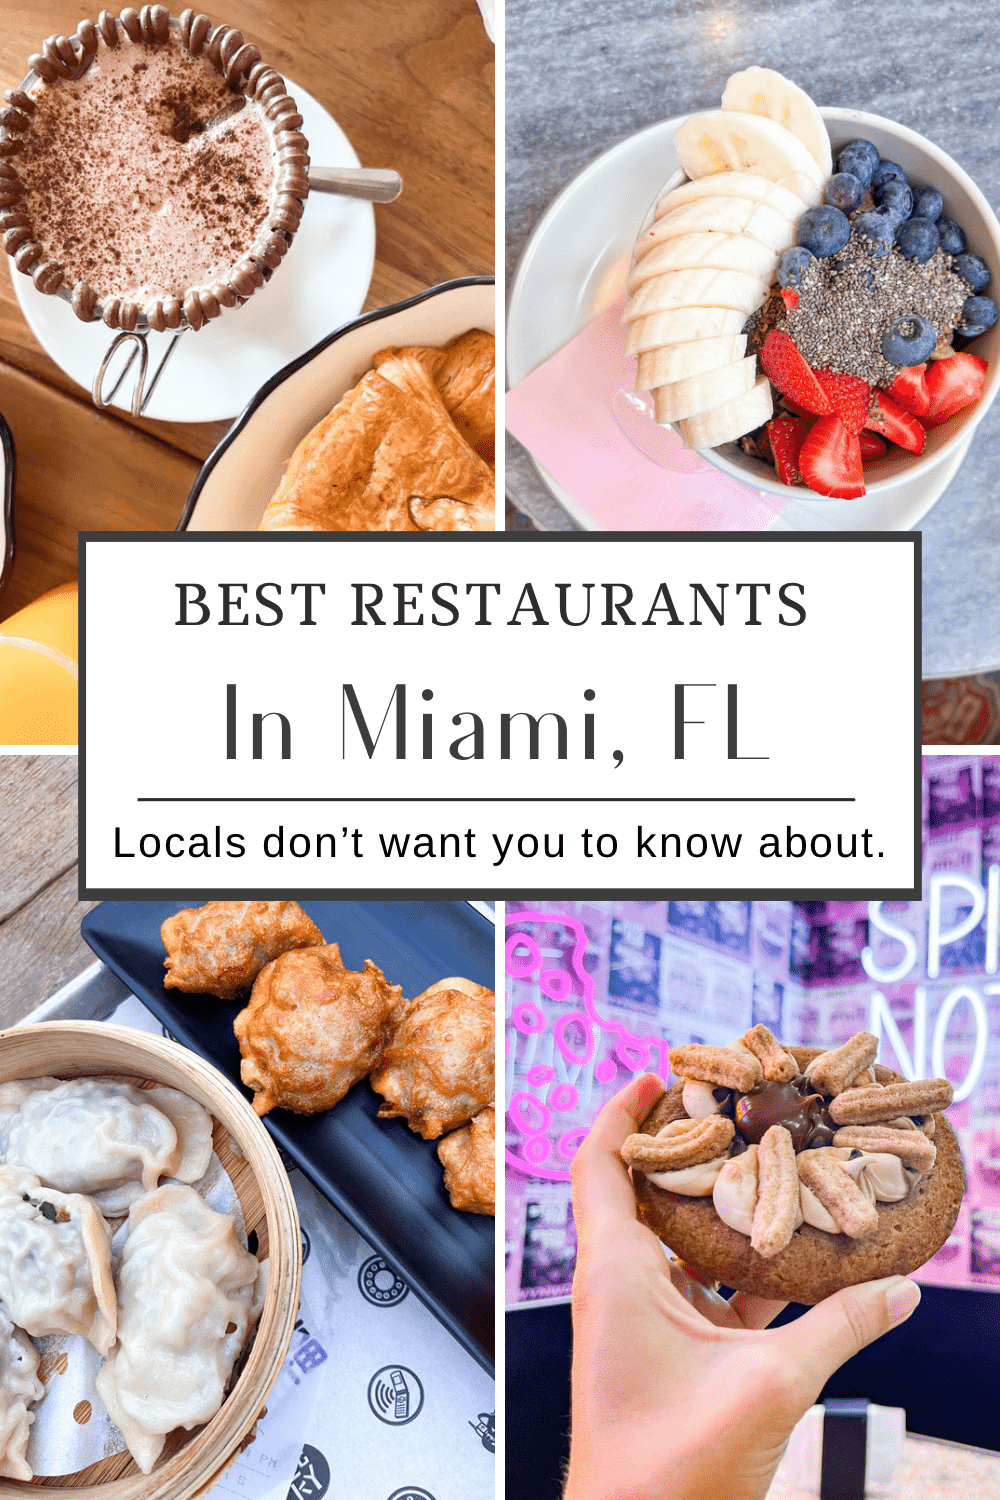 You are currently viewing The Best Restaurants in Miami the Locals Don’t Want You to Know